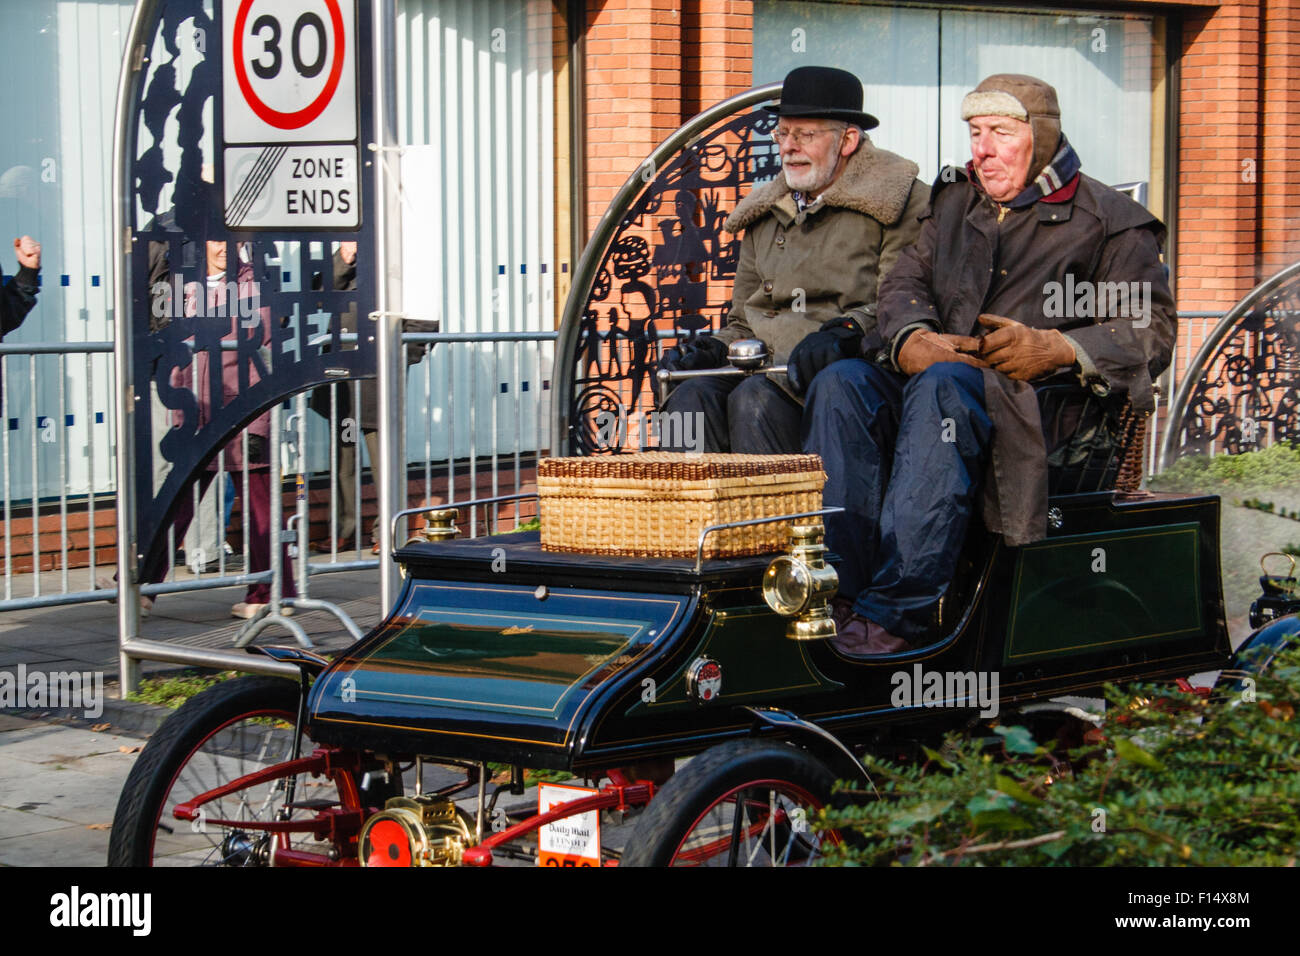 Drivers pass through Crawley in a vintage vehicle during the London to Brighton Veteran Car Run Stock Photo